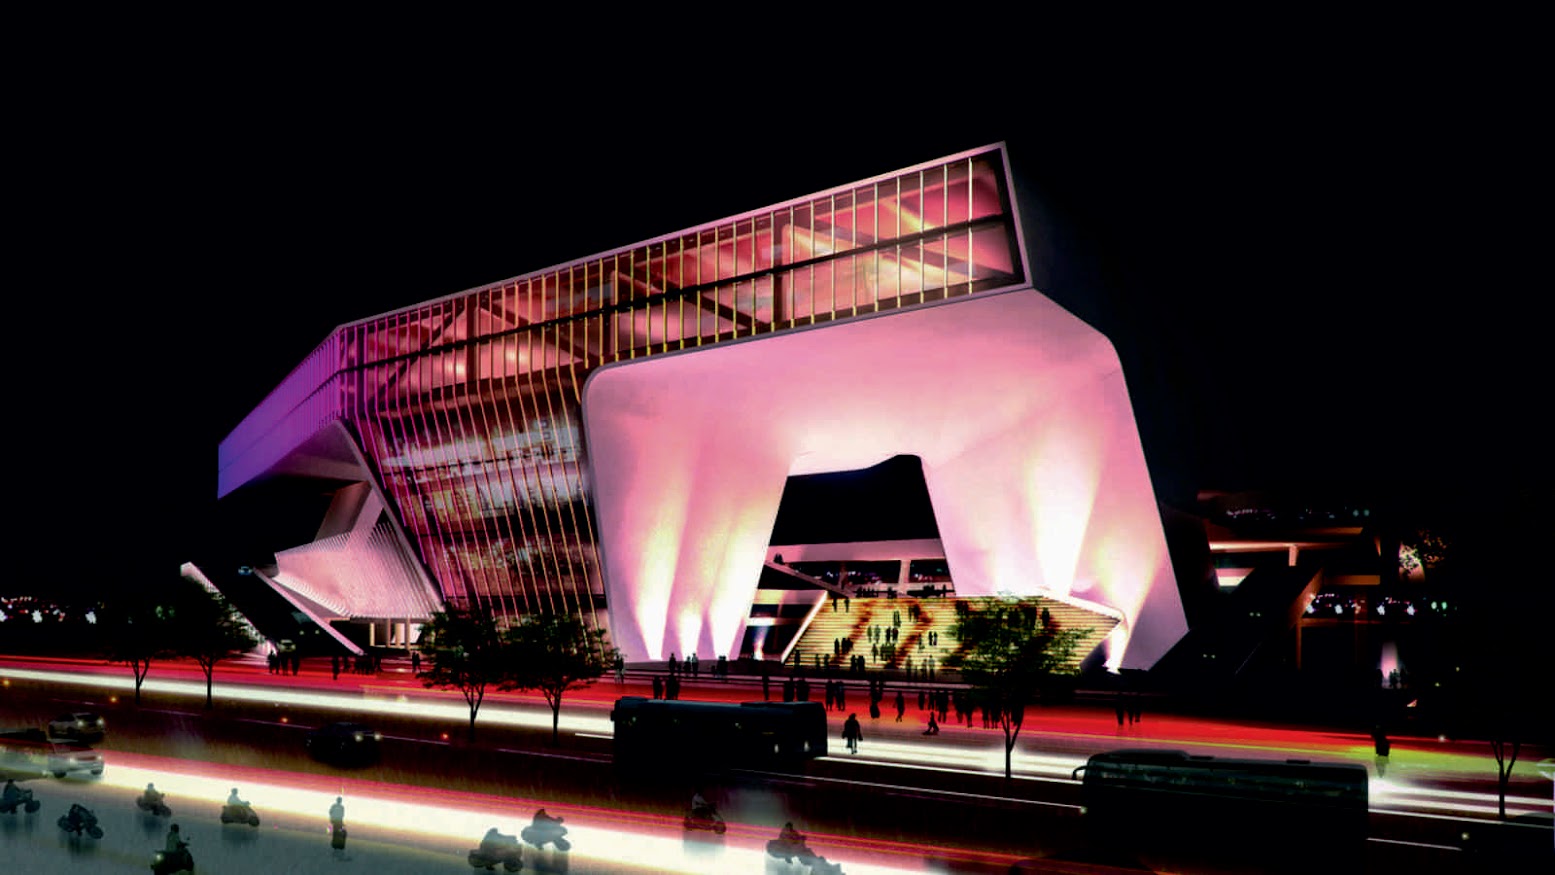 Kaohsiung, Taiwan: [KAOHSIUNG PORT AND CRUISE SERVICE CENTER BY JET ARCHITECTURE]